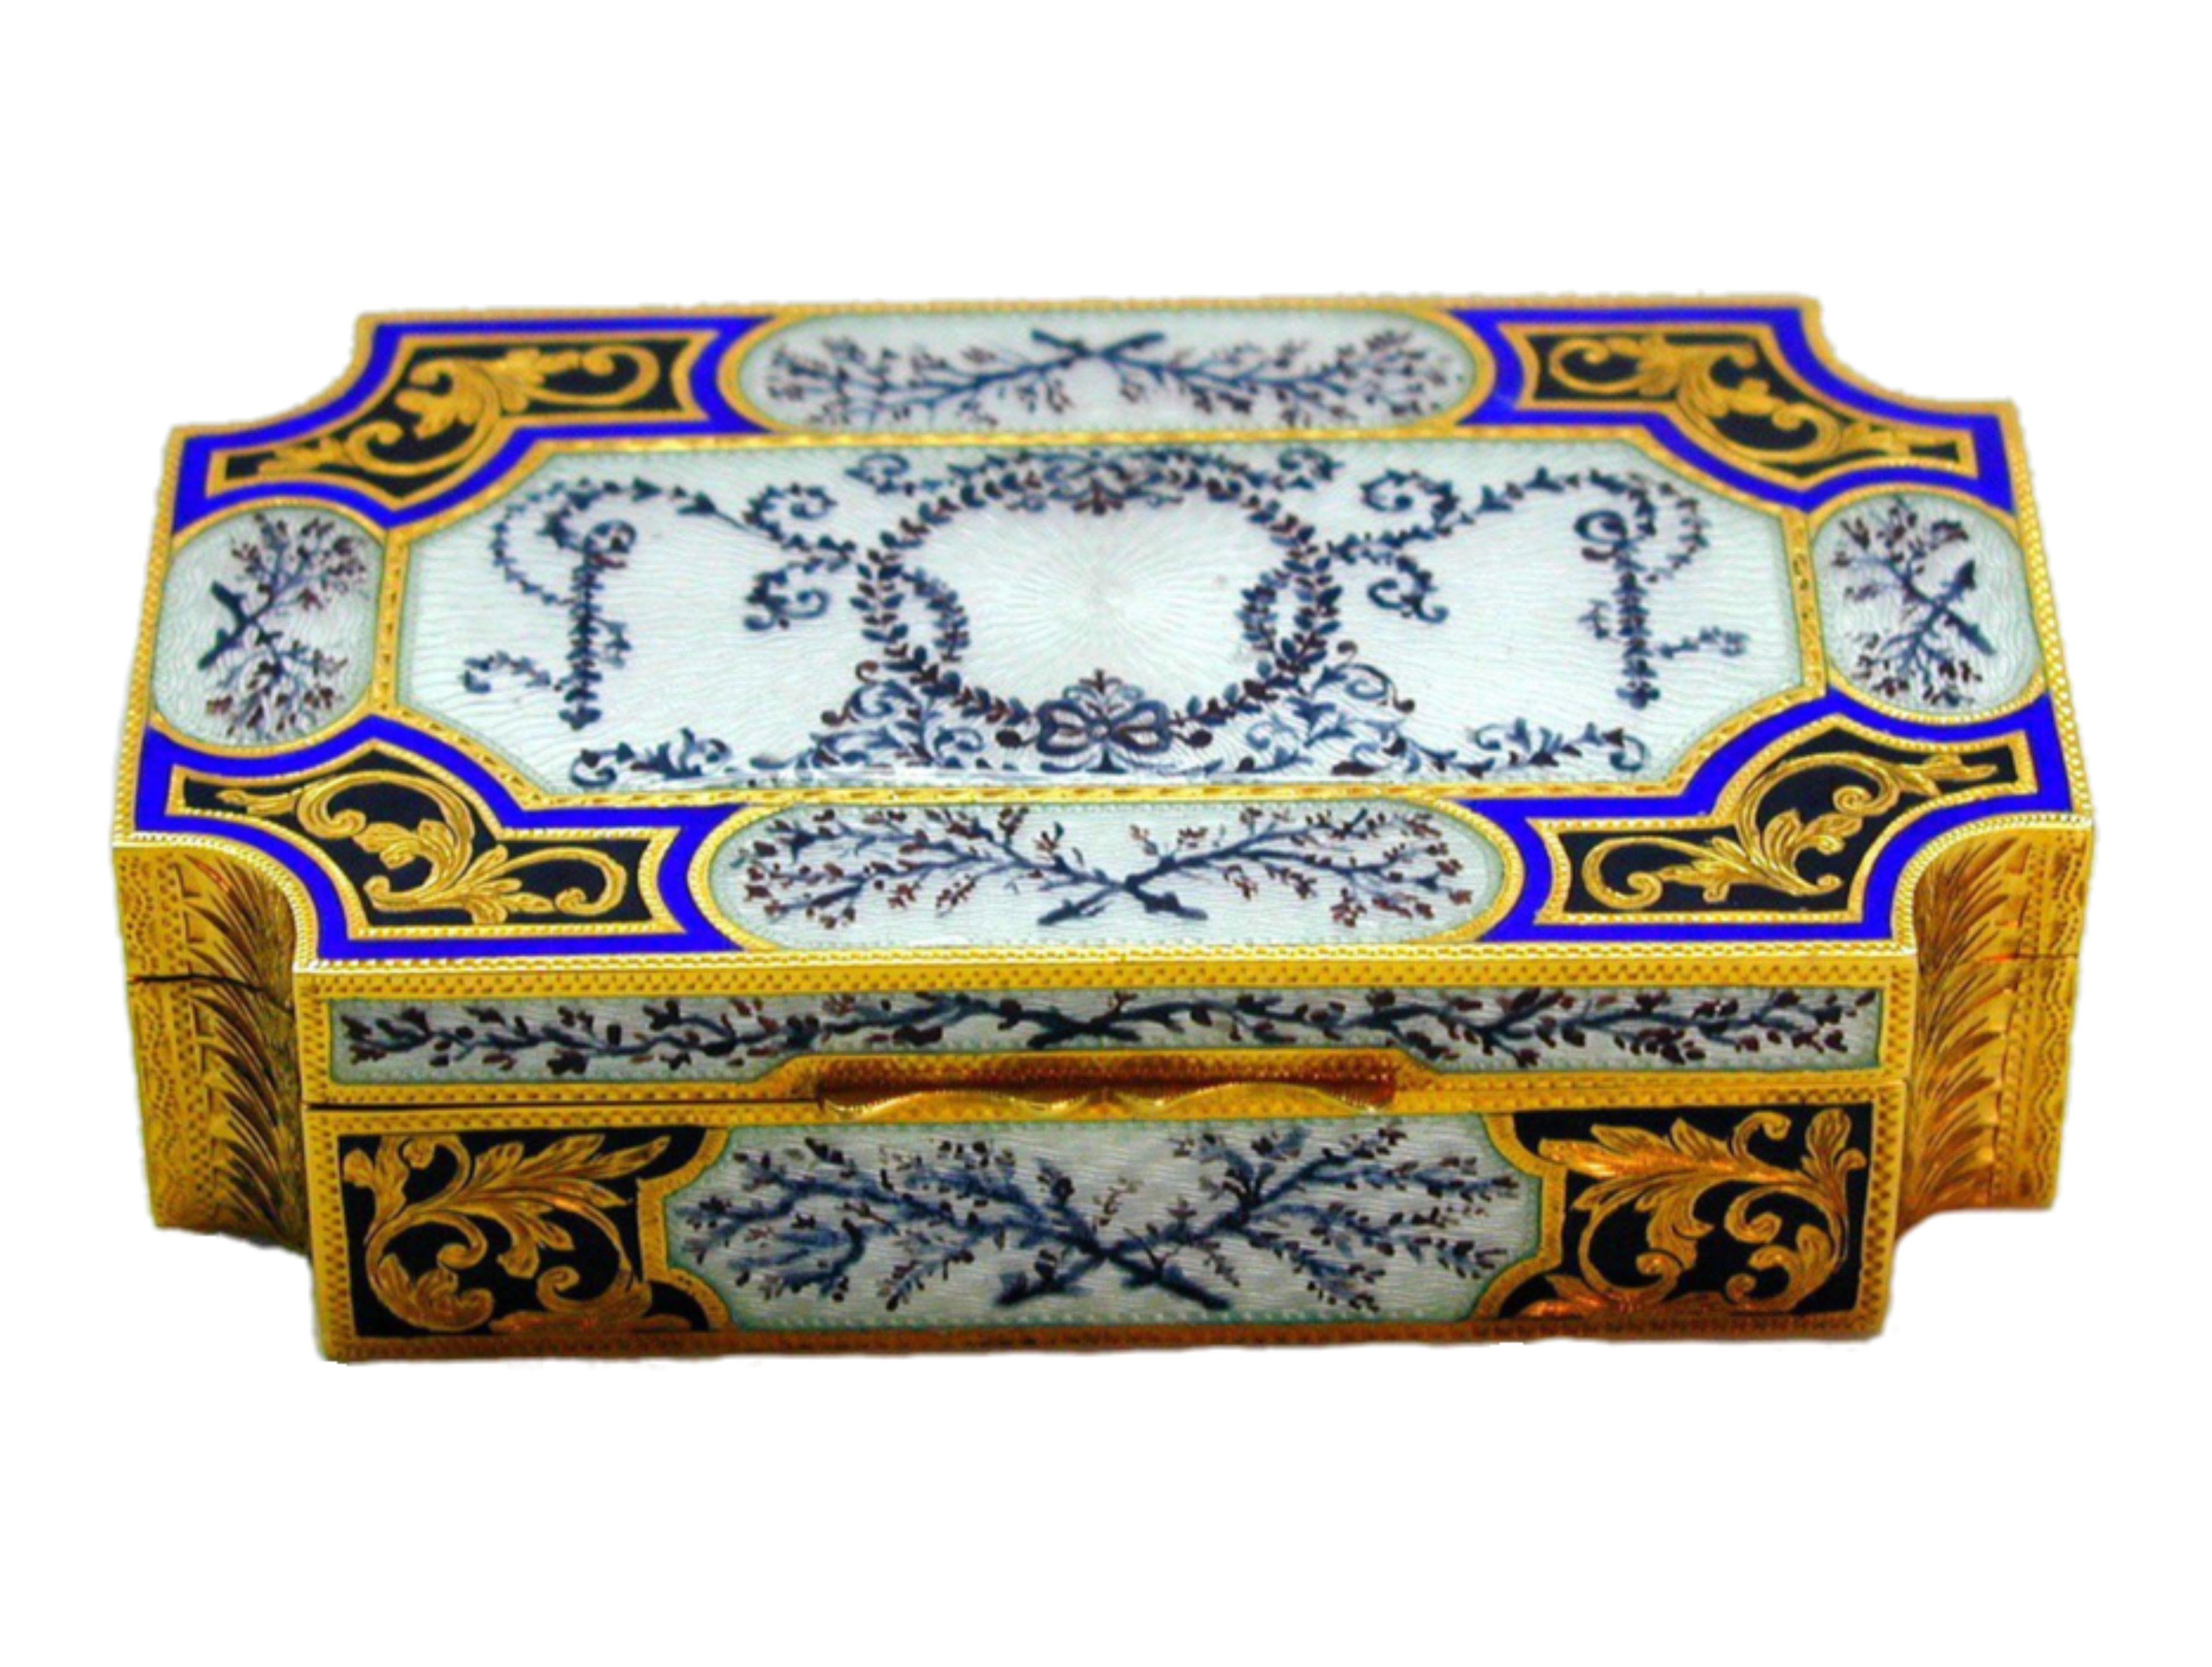 Rectangular box with concave corners in 925/1000 sterling silver gold plated with translucent fire enamels and late Russian Empire style ornaments hand painted on guilloché and artistic hand engraved finishing. Size cm. 6 x 11 x 3 Weight g. 280-